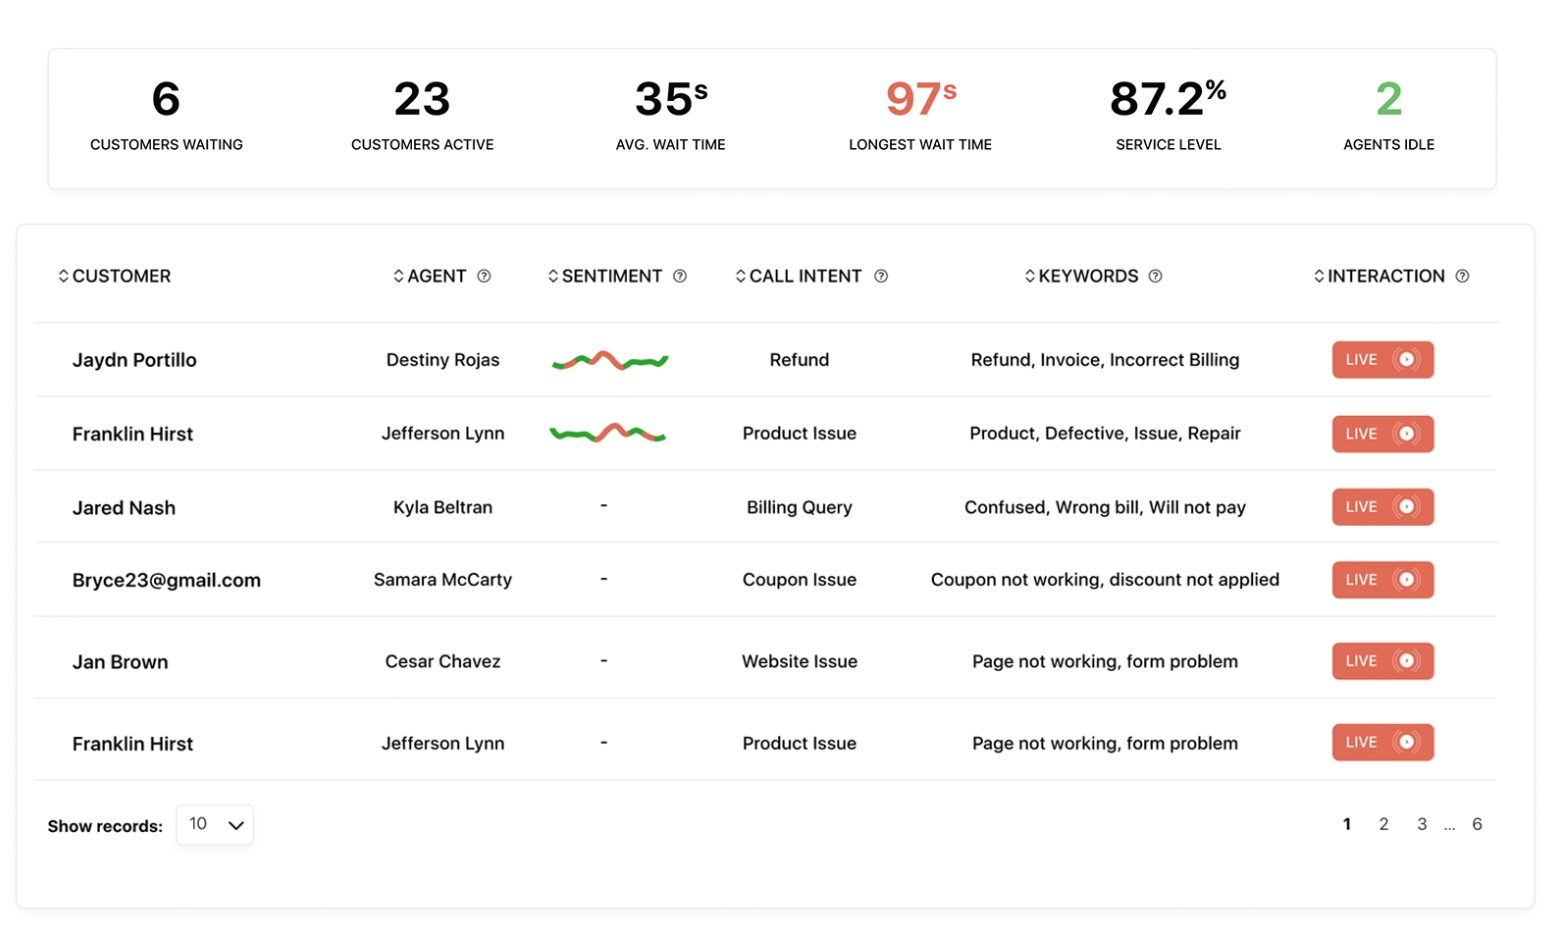 Get customer sentiment scores. Receive sentiment data in a real-time dashboard to resolve issues faster. Identify best practices and coaching opportunities to improve agent performance. Provide customers with quicker results.